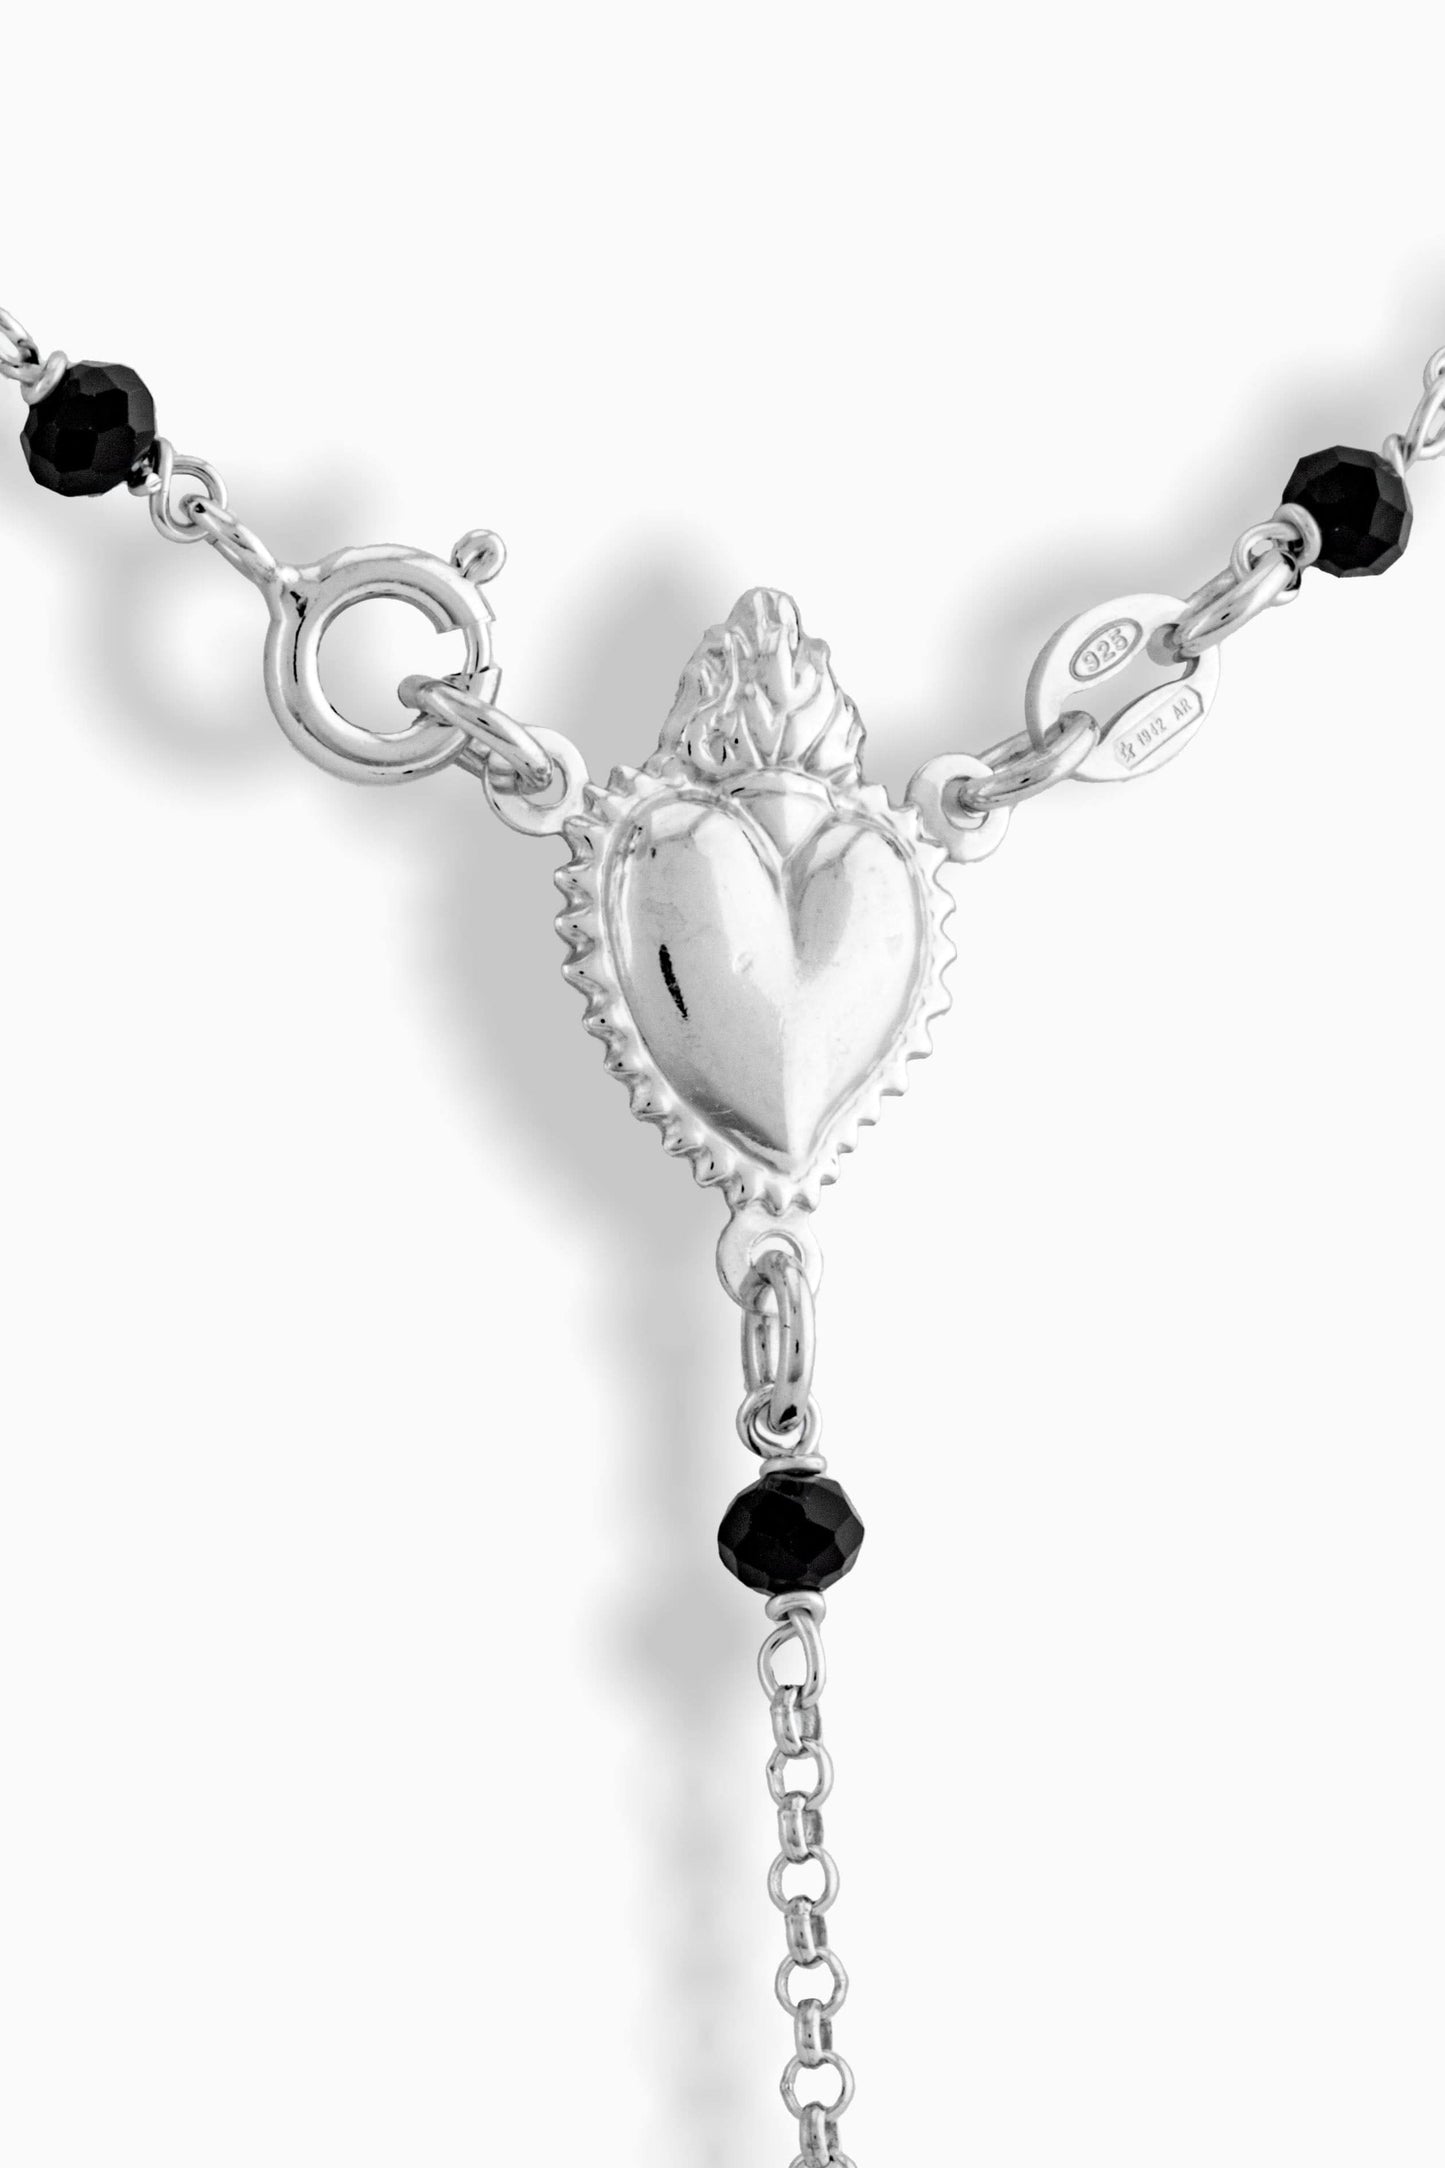 MONDO CATTOLICO Prayer Beads STERLING SILVER ROSARY SACRED HEART 3MM BLACK BEADS